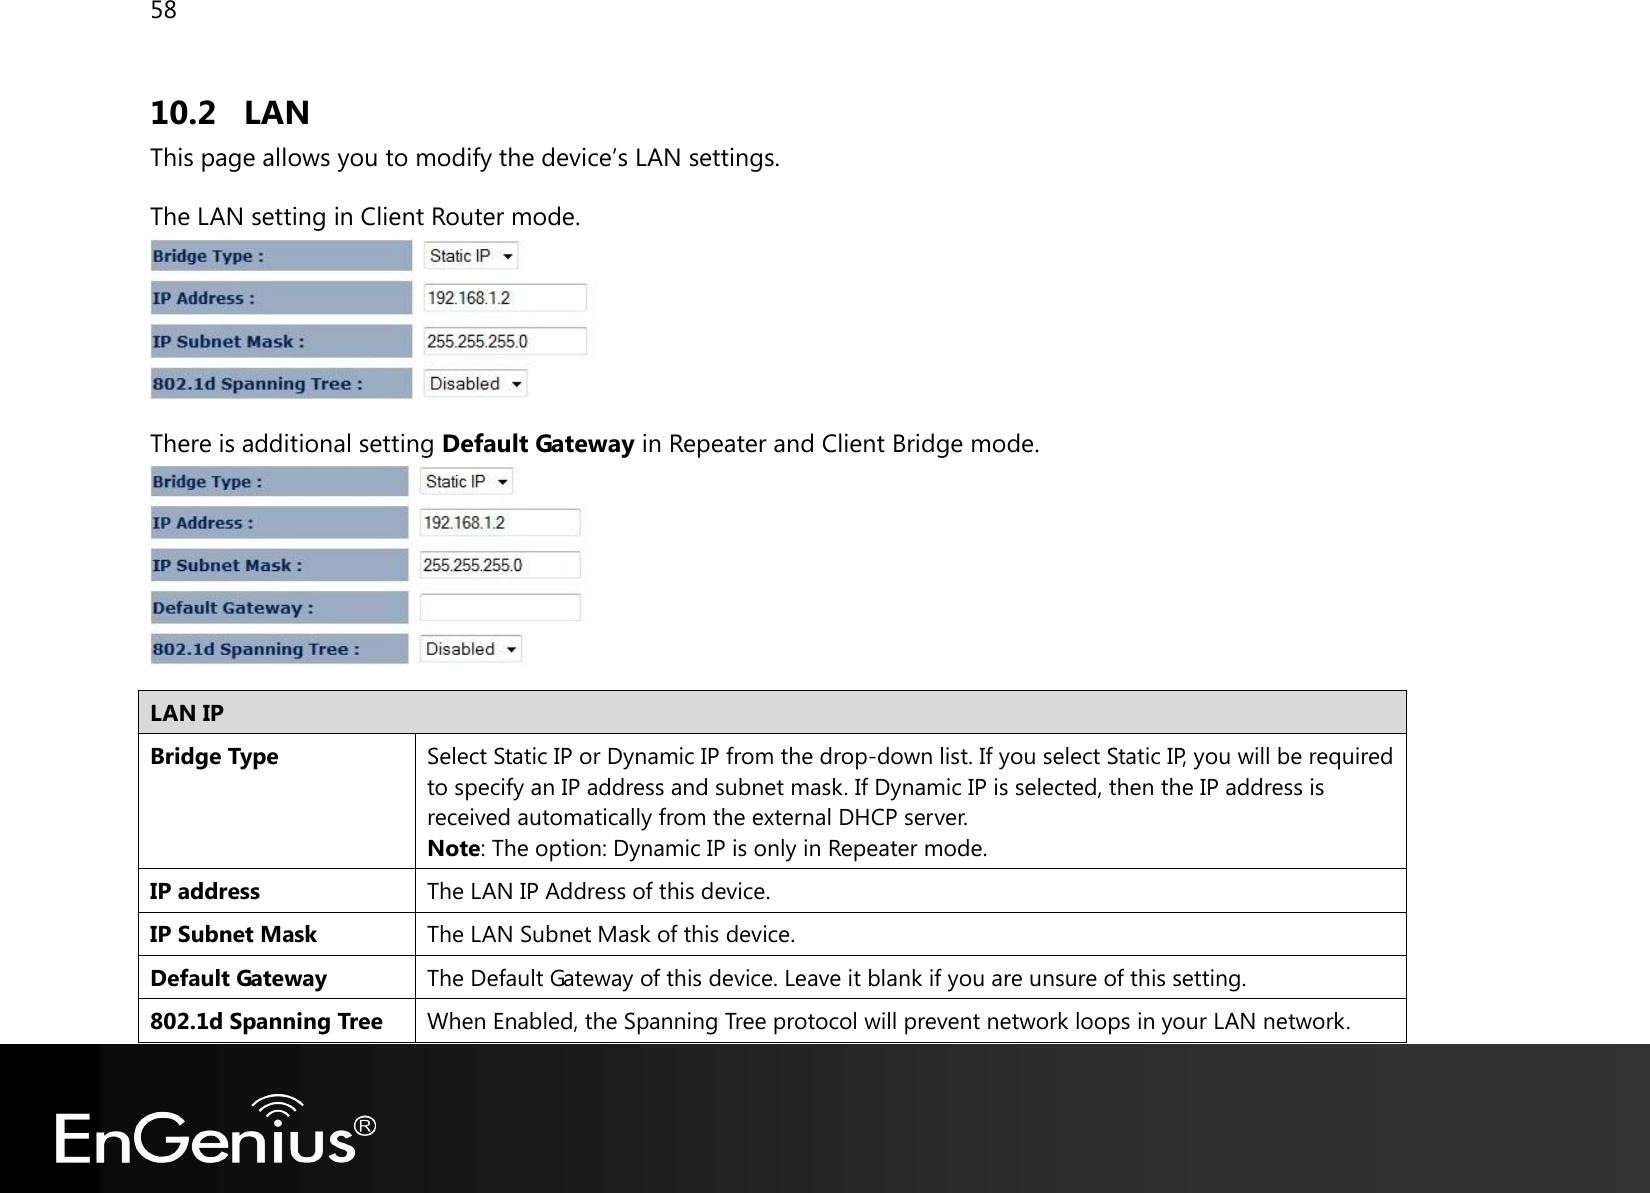 58  10.2 LAN This page allows you to modify the device’s LAN settings. The LAN setting in Client Router mode.  There is additional setting Default Gateway in Repeater and Client Bridge mode.  LAN IP Bridge Type Select Static IP or Dynamic IP from the drop-down list. If you select Static IP, you will be required to specify an IP address and subnet mask. If Dynamic IP is selected, then the IP address is received automatically from the external DHCP server. Note: The option: Dynamic IP is only in Repeater mode. IP address The LAN IP Address of this device. IP Subnet Mask The LAN Subnet Mask of this device. Default Gateway The Default Gateway of this device. Leave it blank if you are unsure of this setting. 802.1d Spanning Tree When Enabled, the Spanning Tree protocol will prevent network loops in your LAN network. 